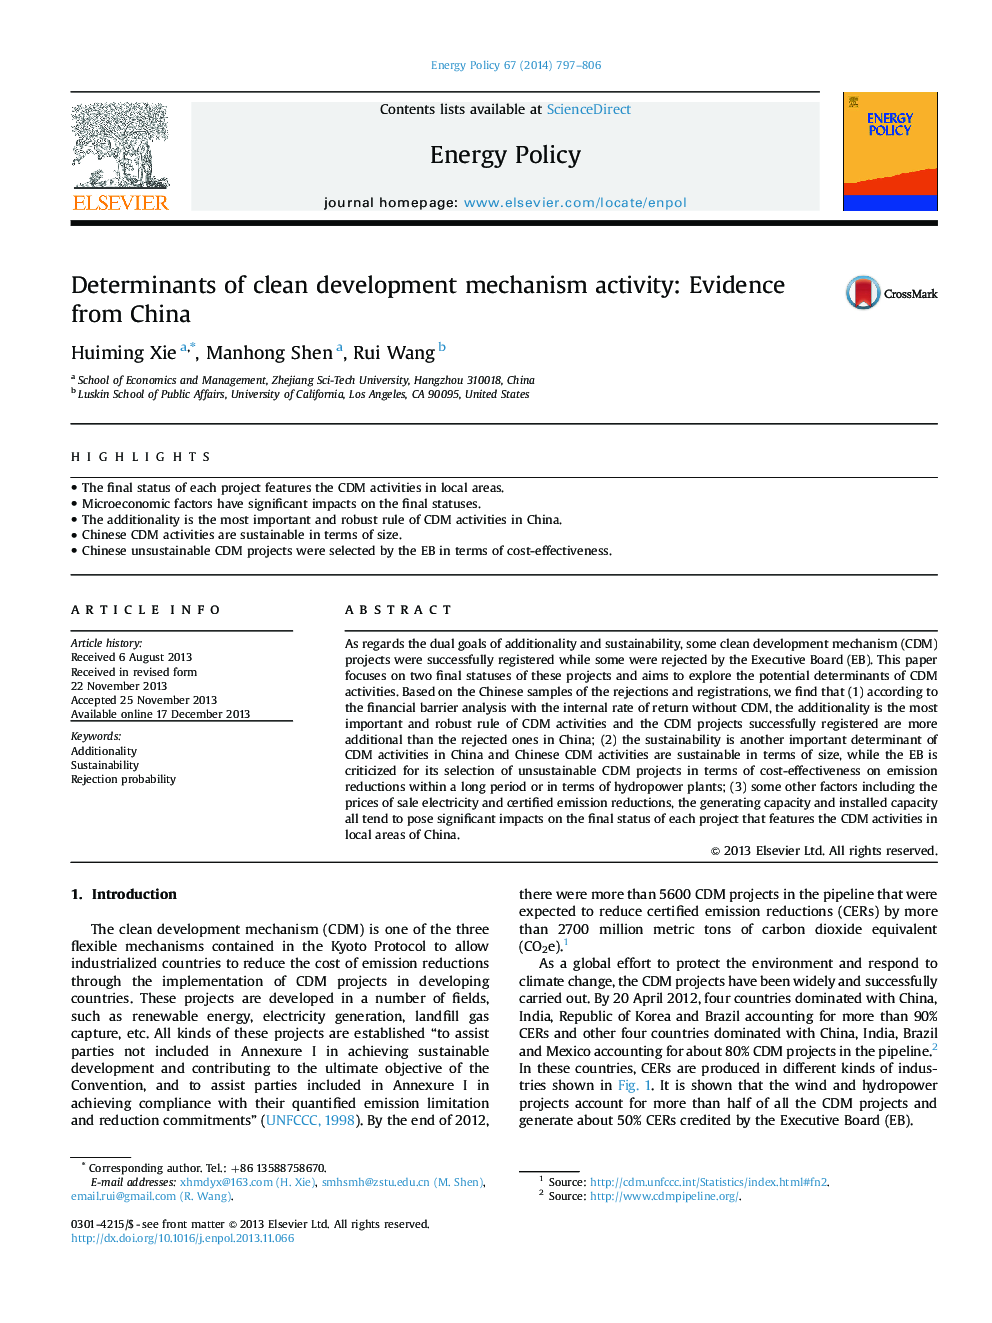 Determinants of clean development mechanism activity: Evidence from China